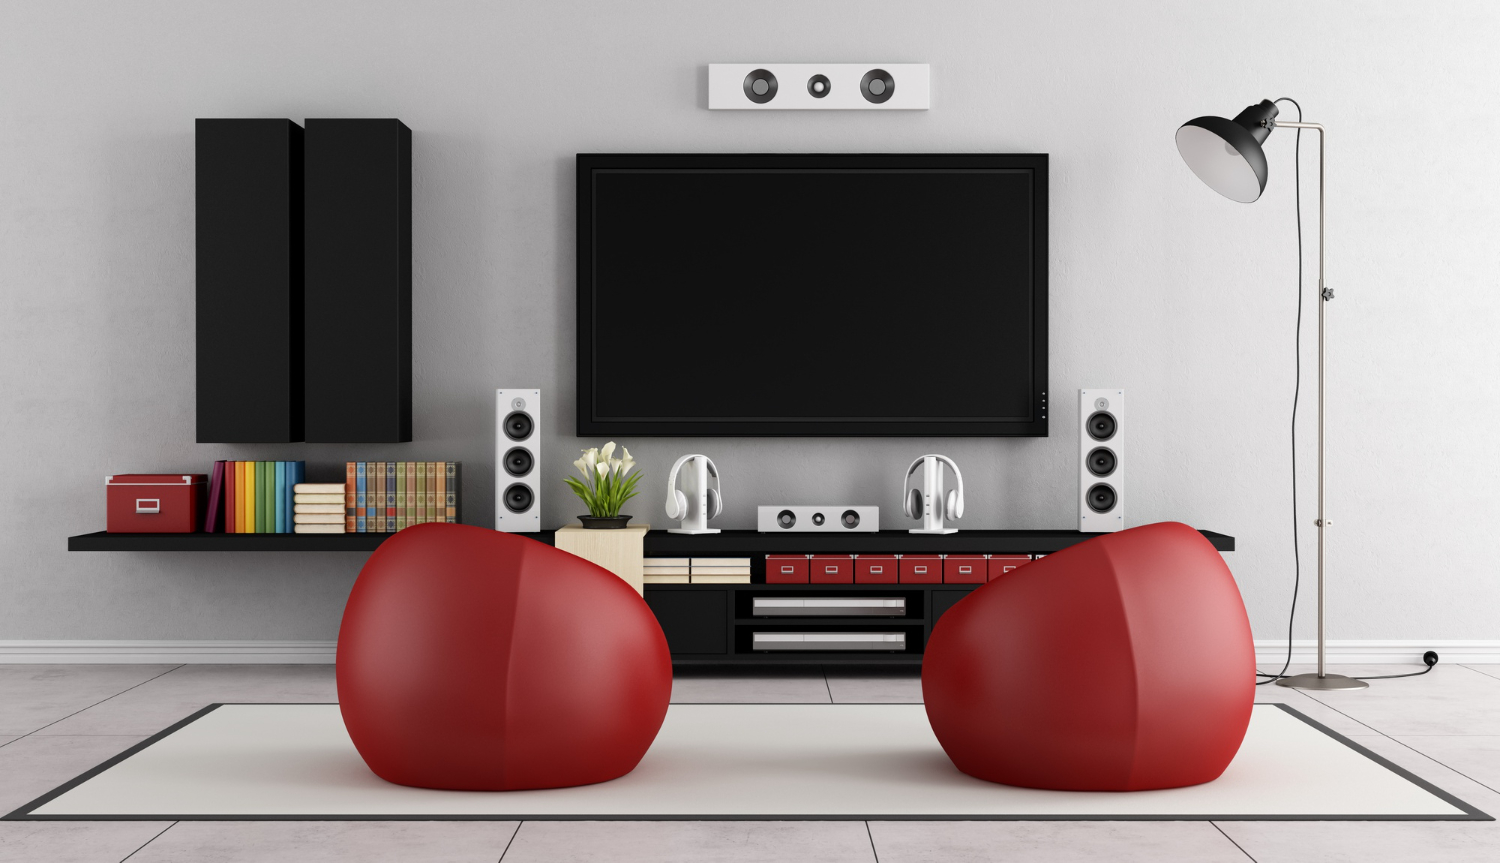 Home theater in the basement – equipment, furniture and everything you need